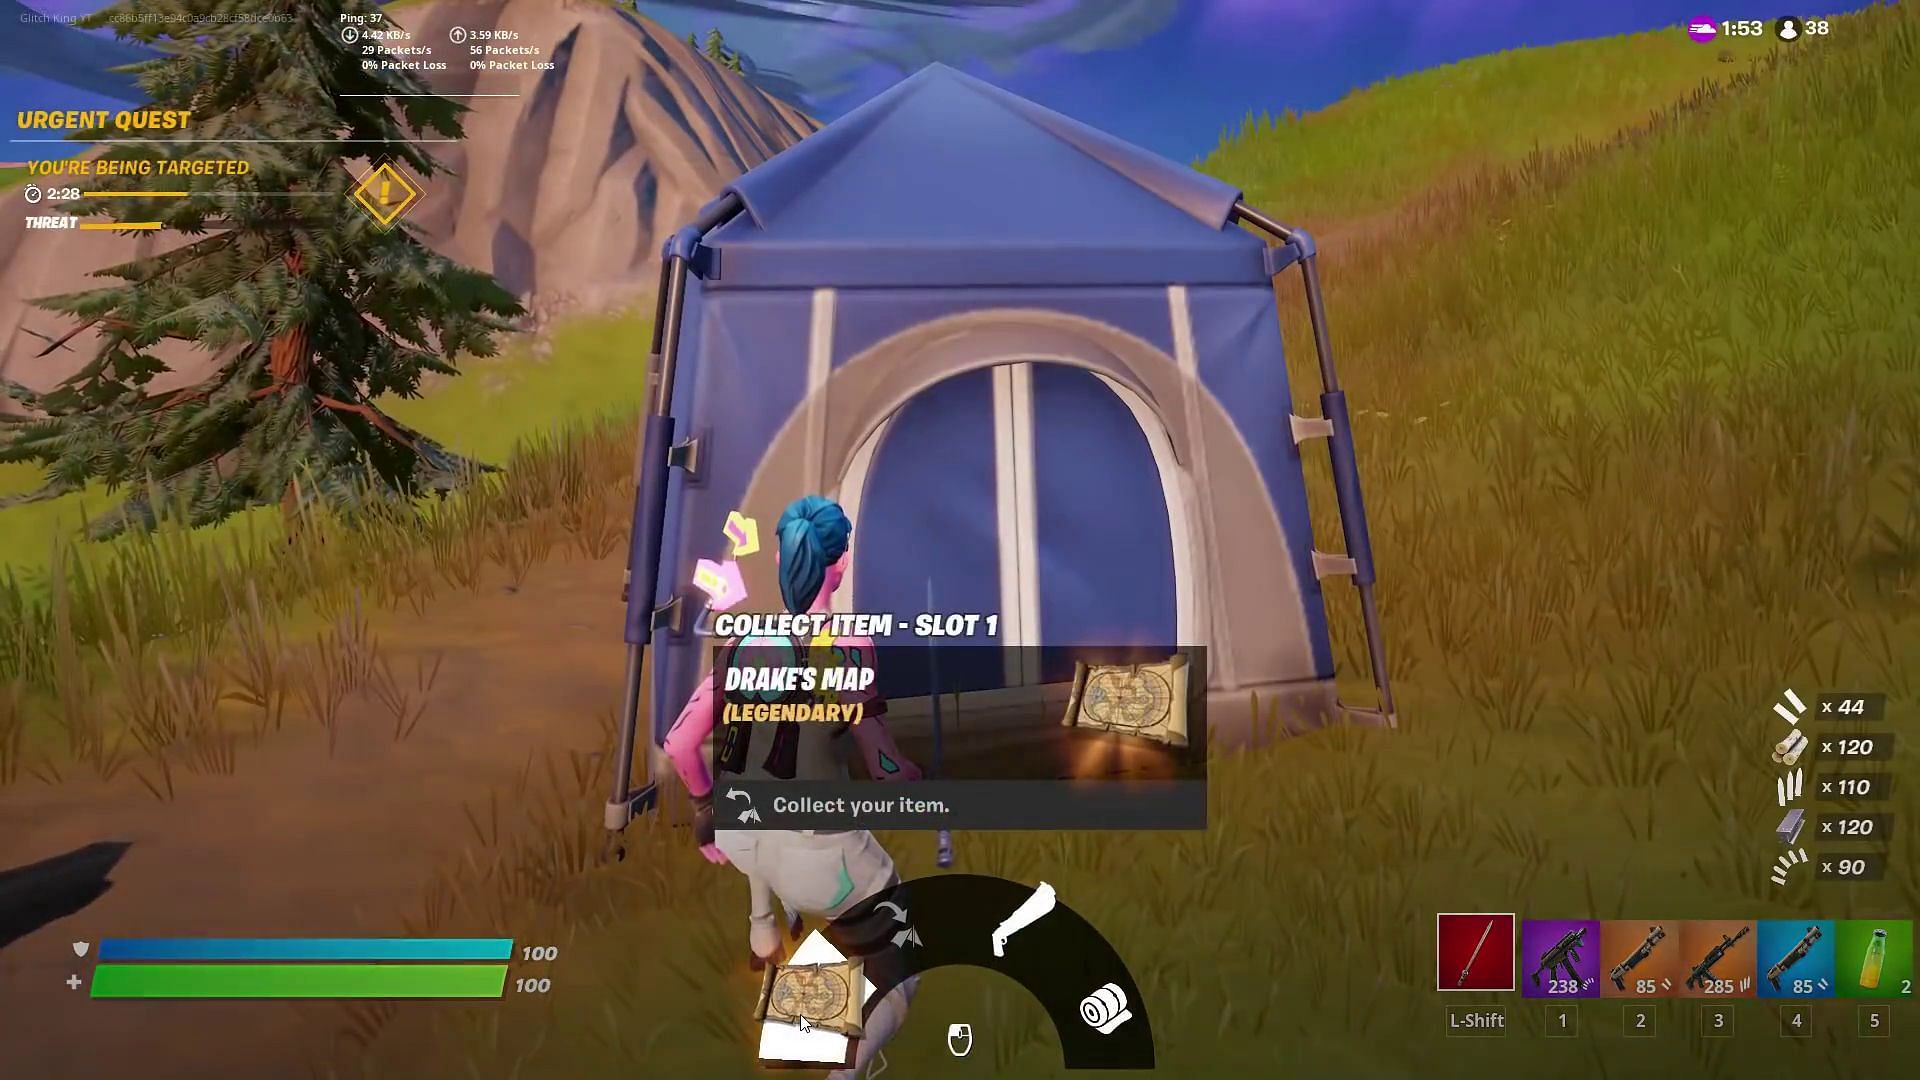 After retrieving items from chest, check if the map is still in the tent (Image via GKIYouTube)